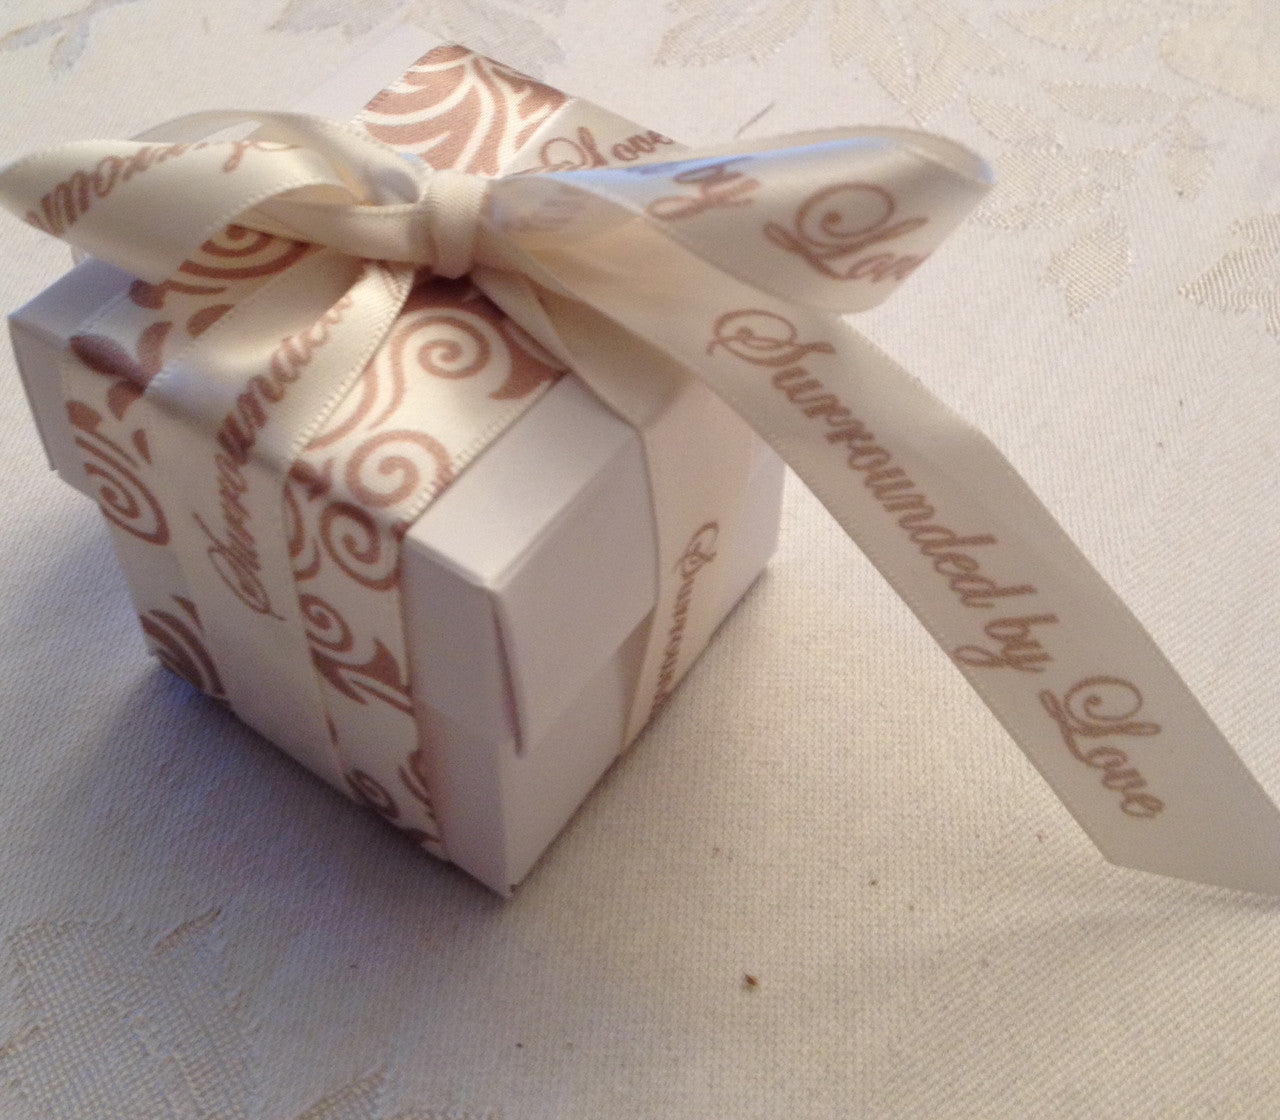 Champagne and Antique White damask pattern is the base for this Thank You favor box. Any guest would feel appreciated taking home this pretty box with something sweet inside.